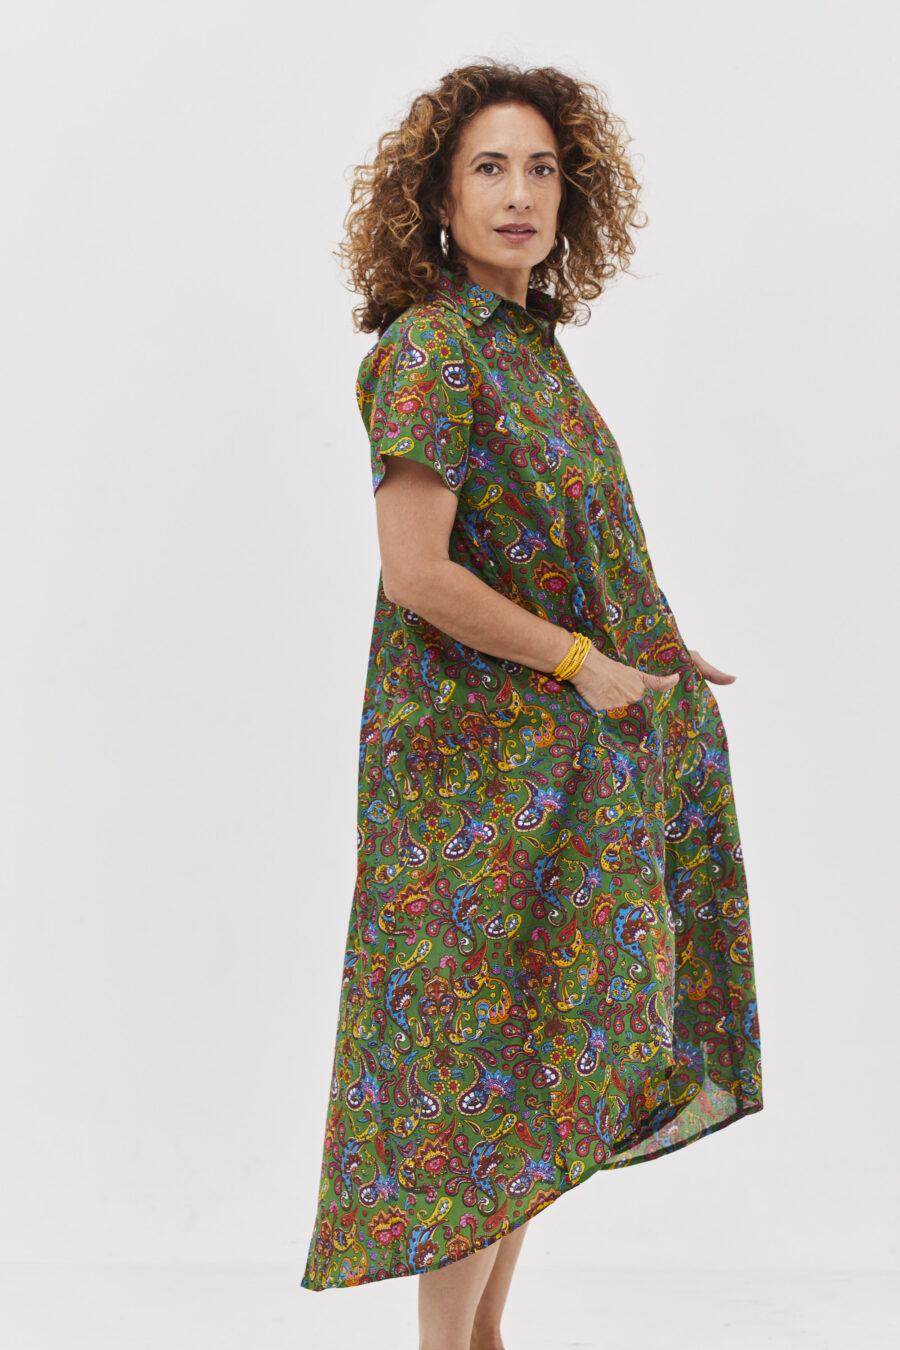 Aiya’le dress | Uniquely designed oversize dress – Green paisley print, green dress with colorful paisley print.